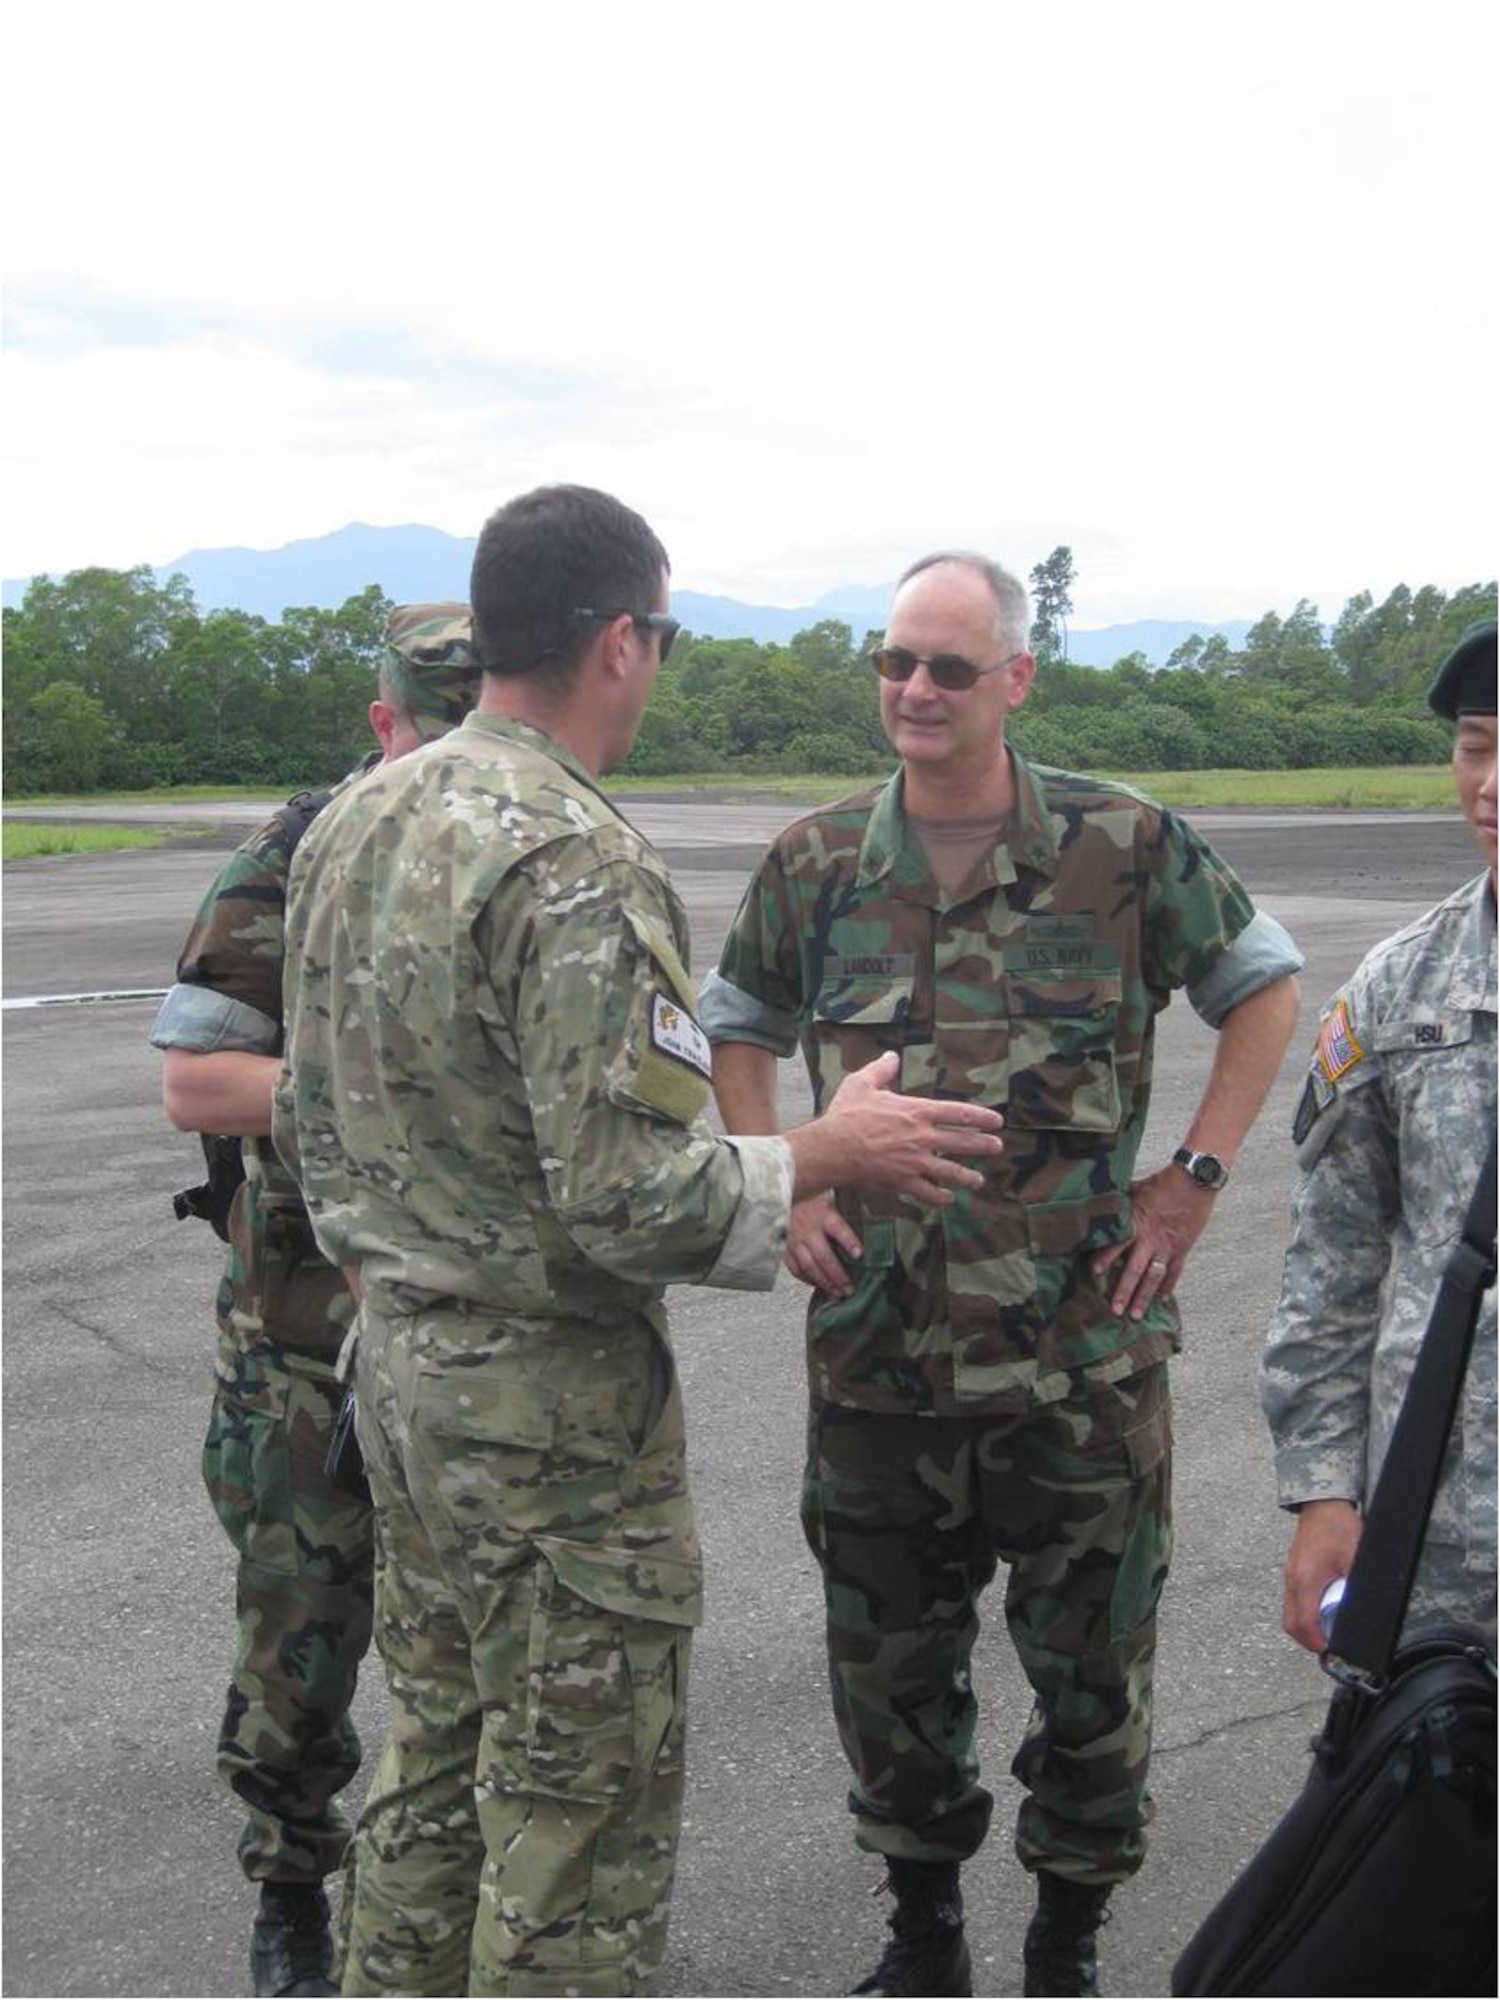 TABING AIRFIELD, Indonesia -- Maj. John Traxler briefs Rear Adm. Richard Landolt, the Amphibious Force Seventh Fleet commander, here Oct. 7 on the airfield's capabilities after U.S. and Indonesian forces surveyed and opened the closed airfield. U.S. Air Force combat controllers and Indonesian Air Force air traffic controllers are now manning the airfield to support fixed and rotary wing aircraft supporting humanitarian relief operations near Padang in western Indonesia. (Courtesy photo) 